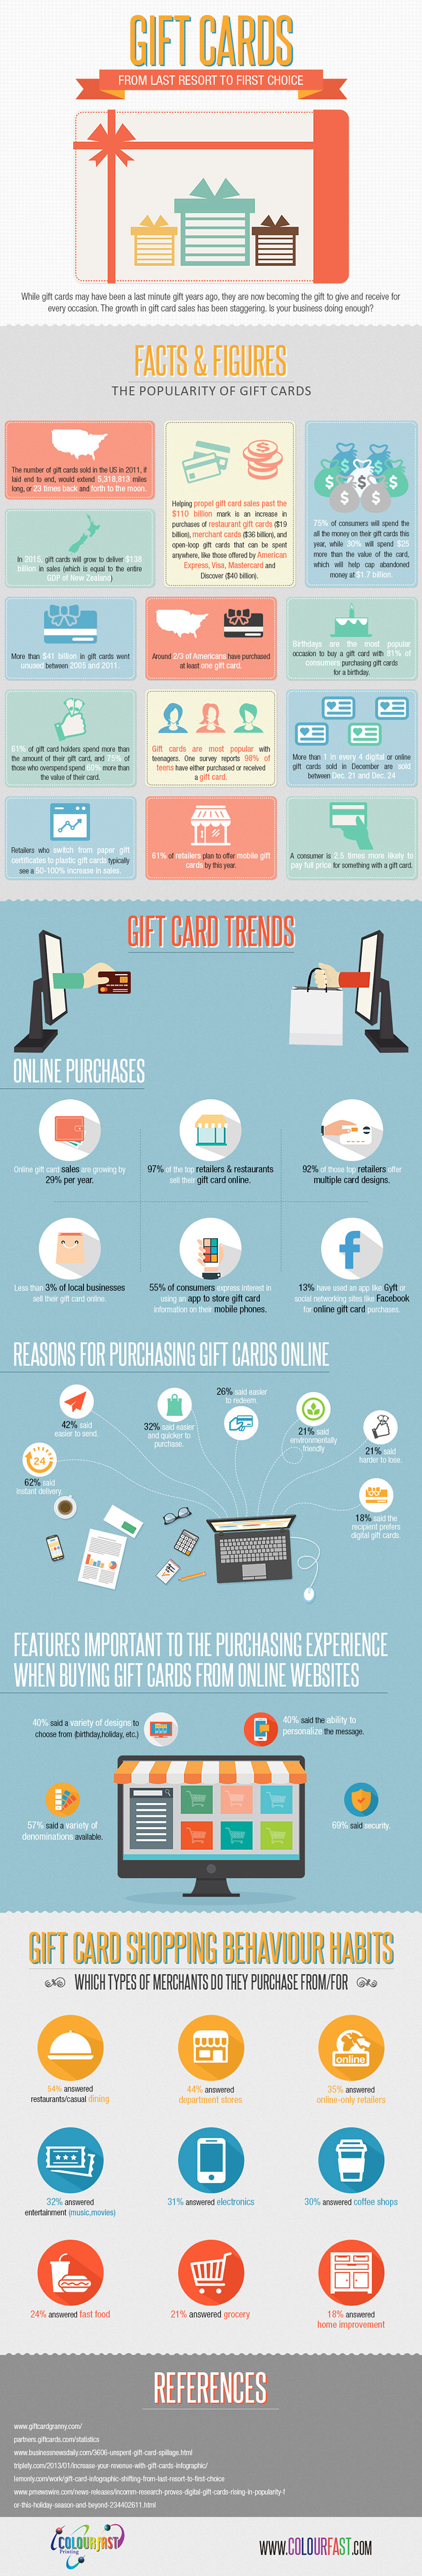 Gift-Cards-for-small-business